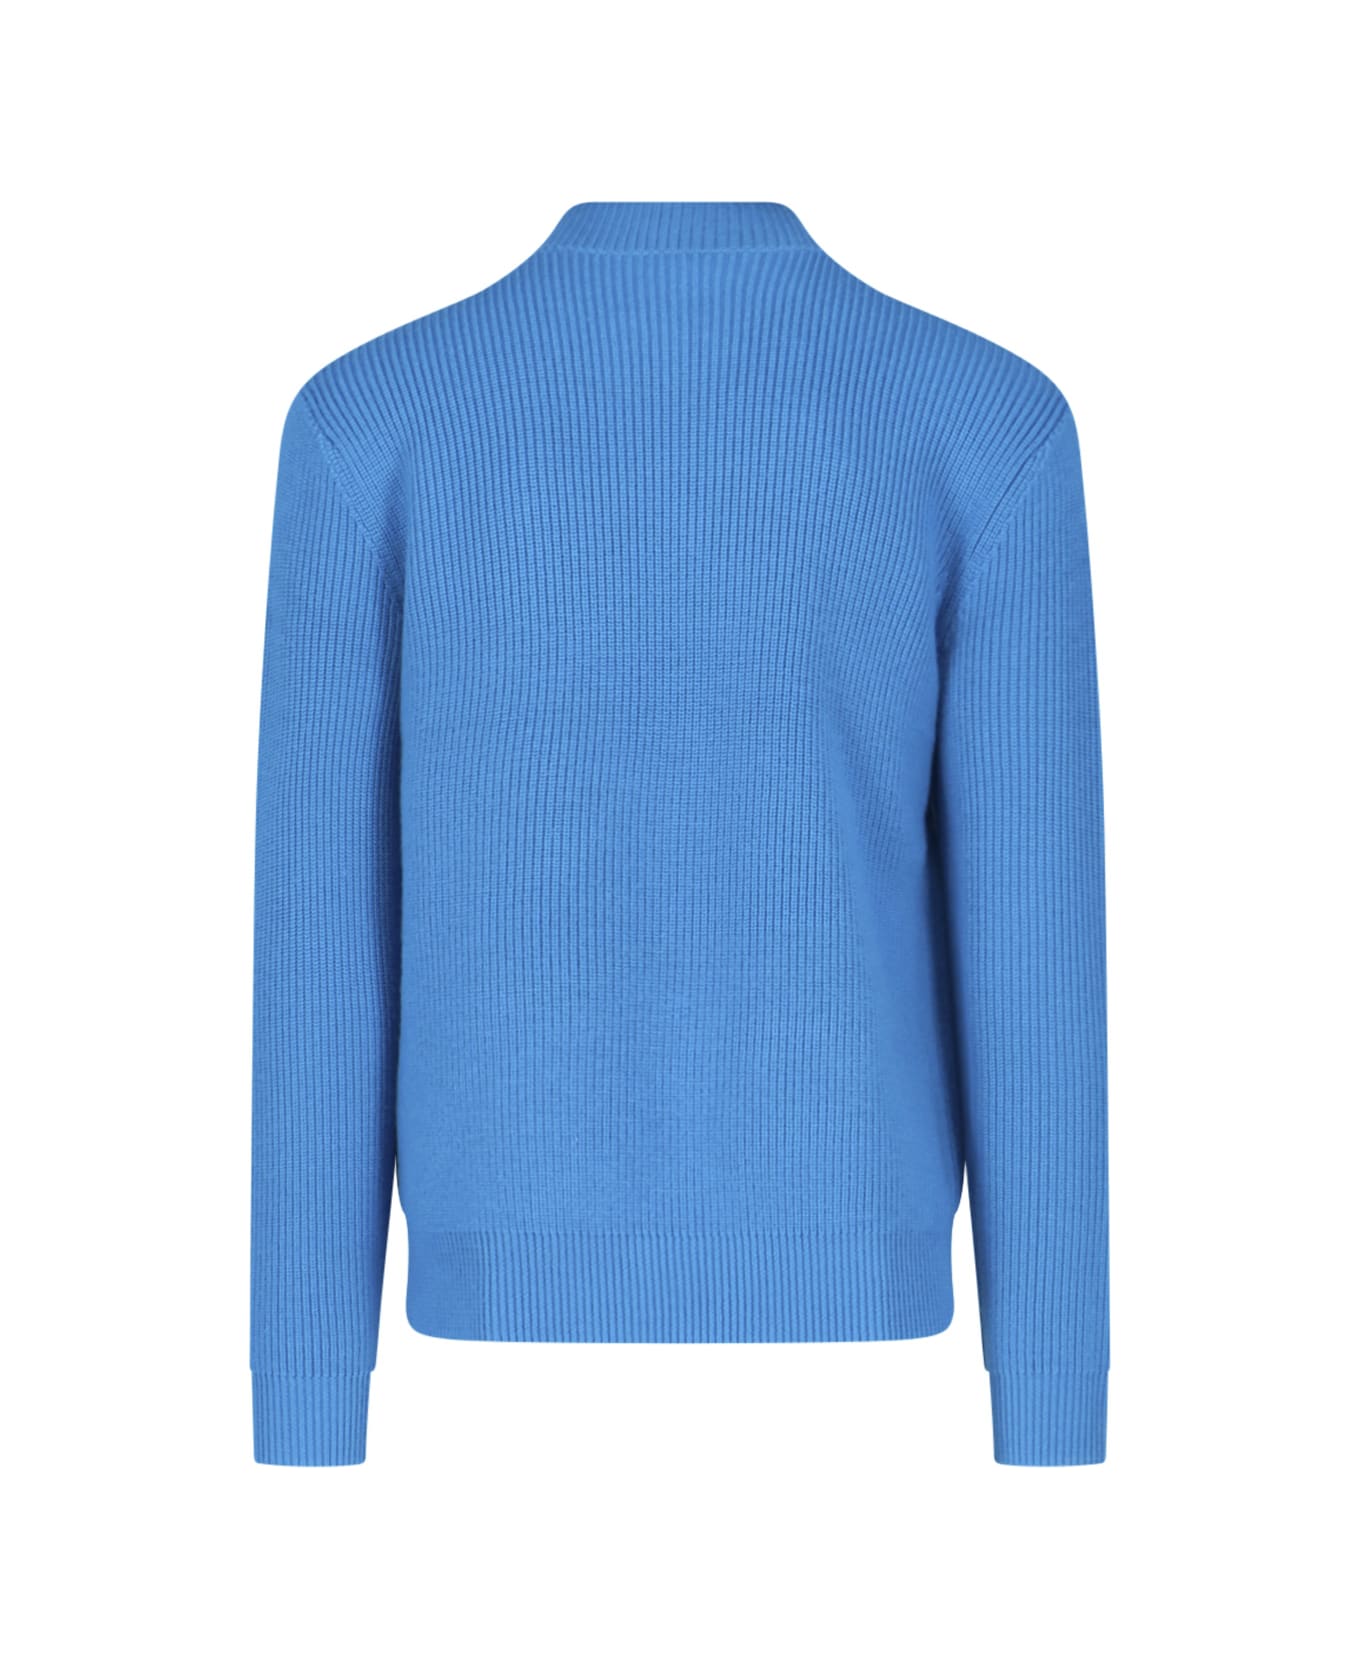 J.W. Anderson High Neck Sweater - Blue